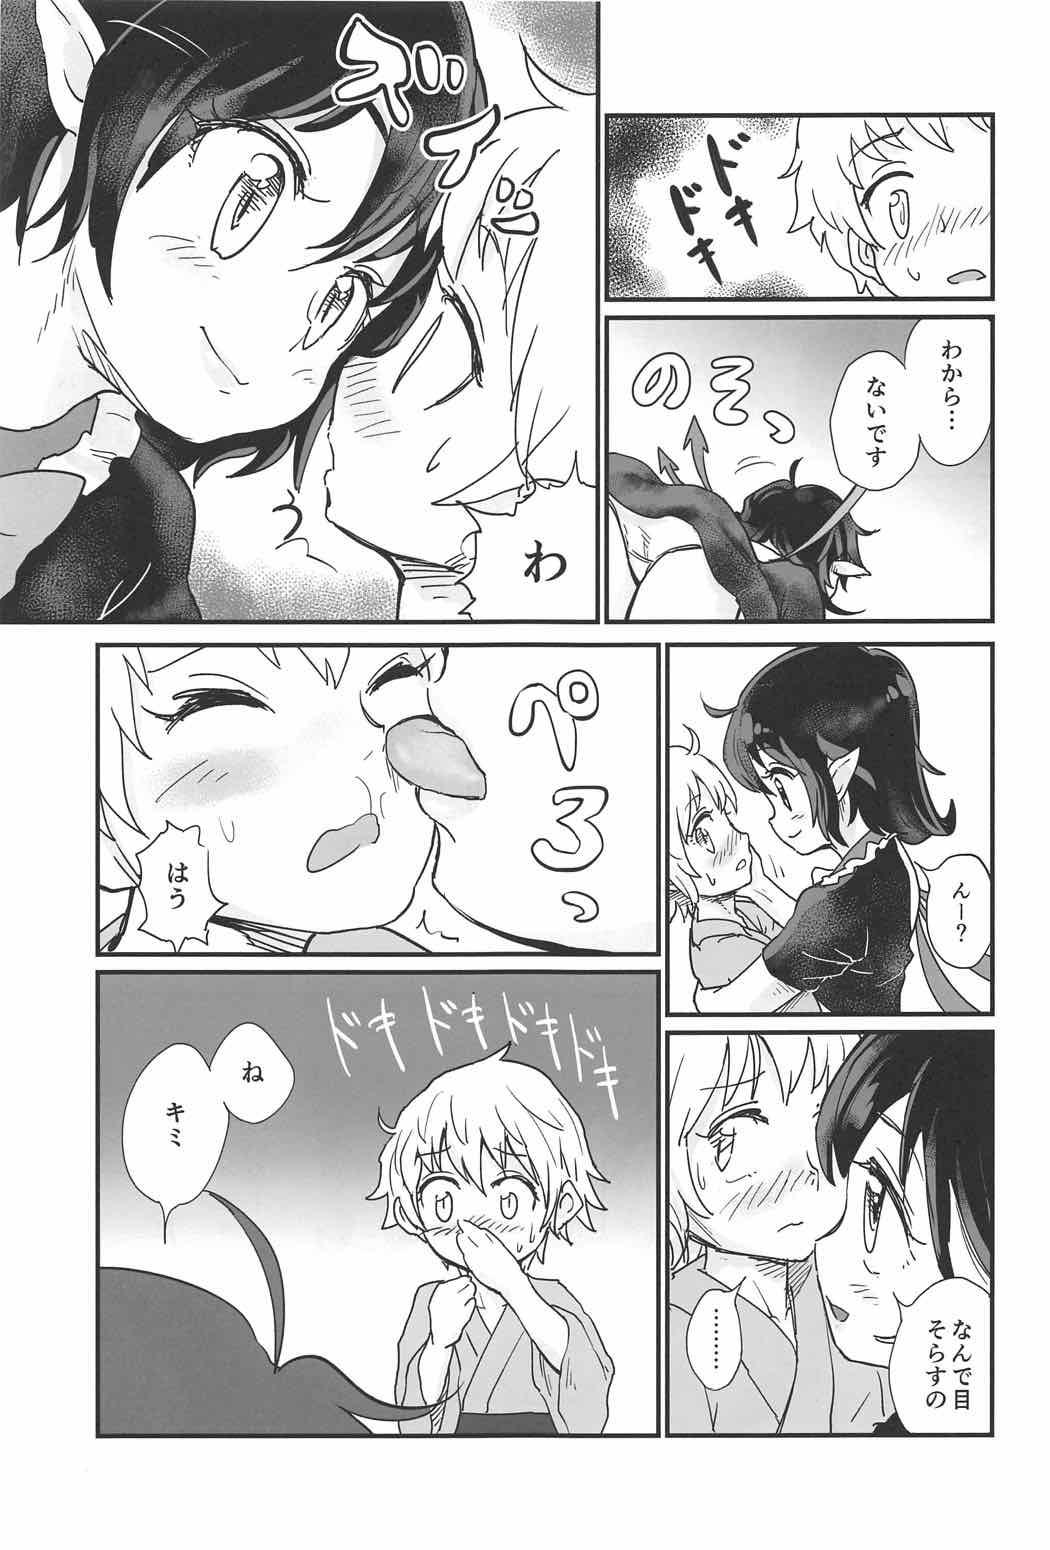 Best Blowjobs Ever Nue to Shounen - Touhou project Celebrity Sex Scene - Page 8